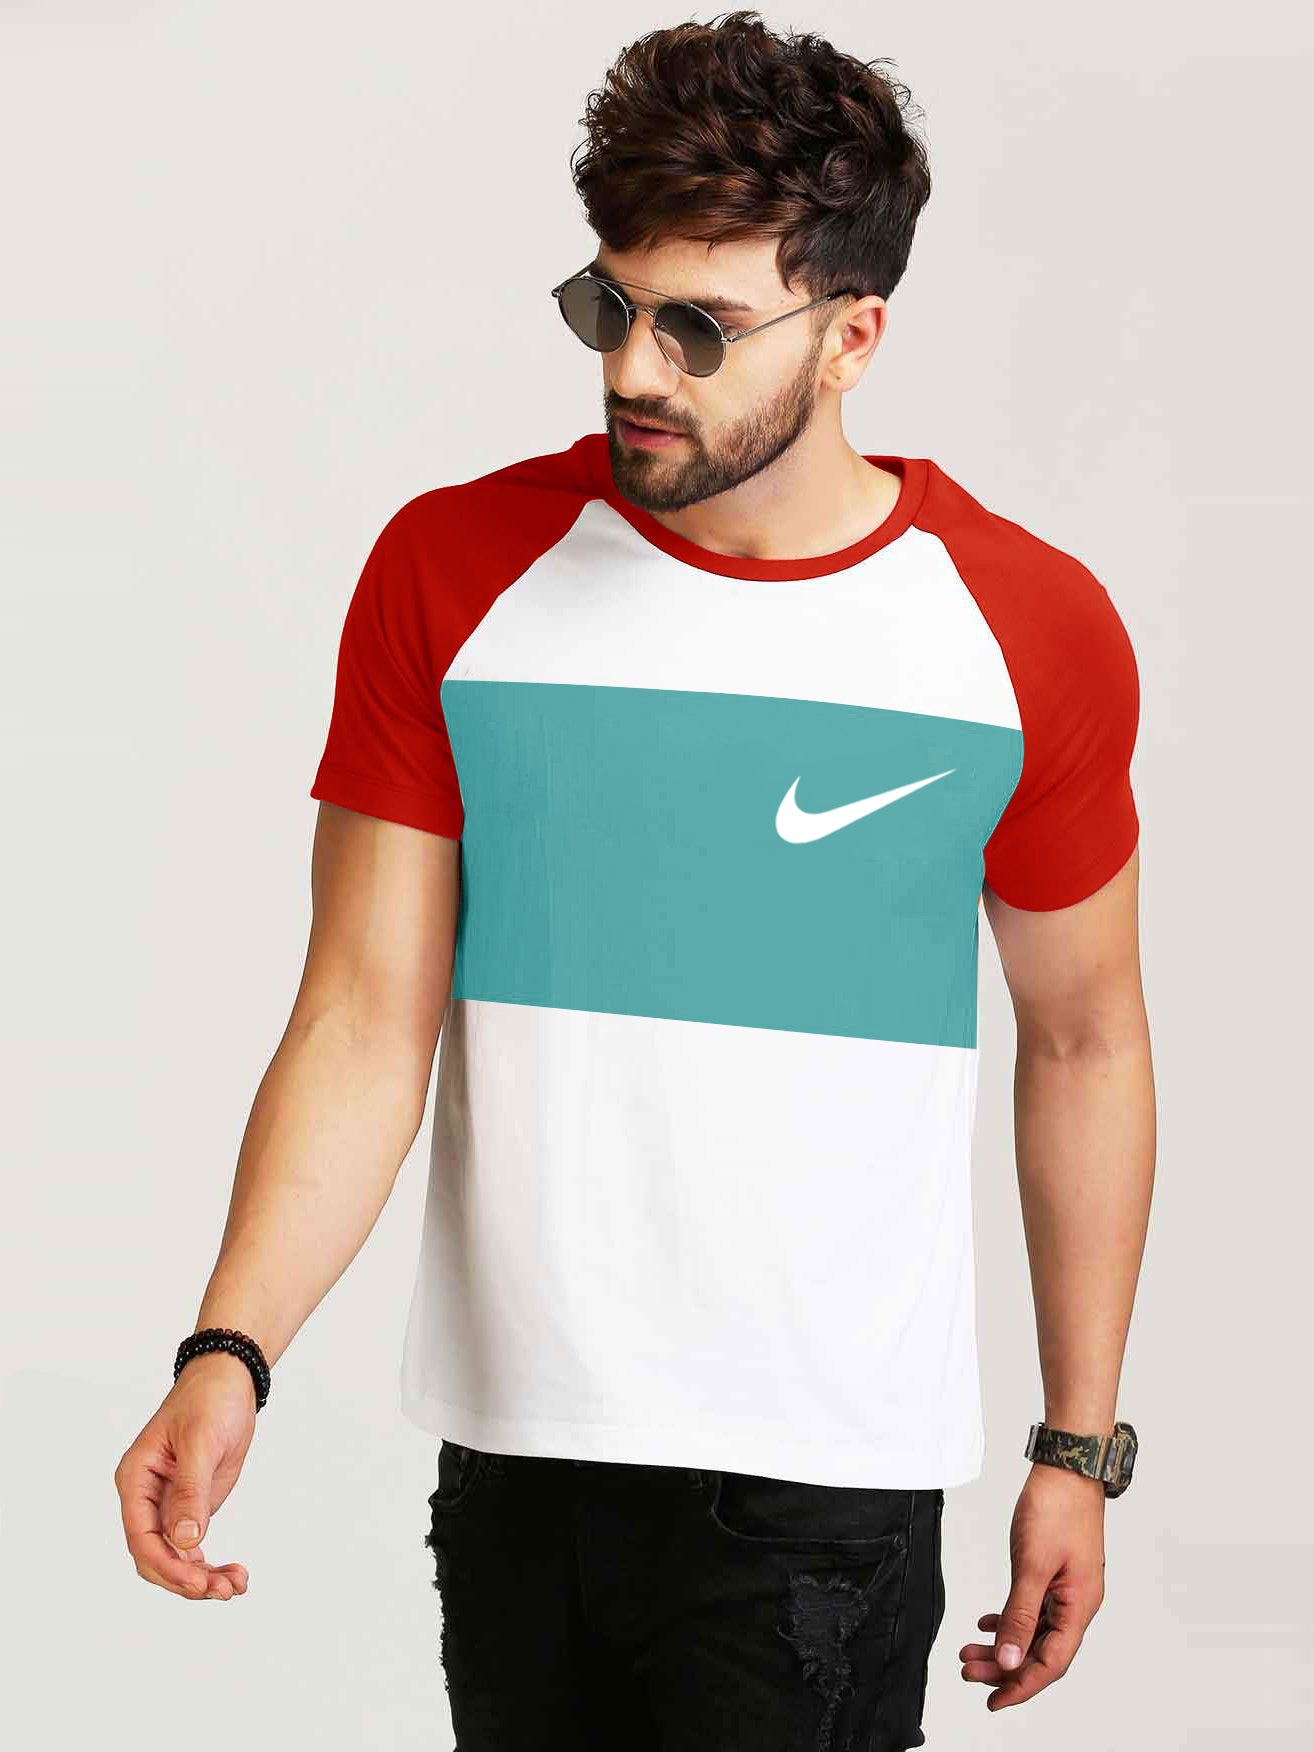 NK Crew Neck Single Jersey Tee Shirt For Men-White & Red with Panel-SP2369